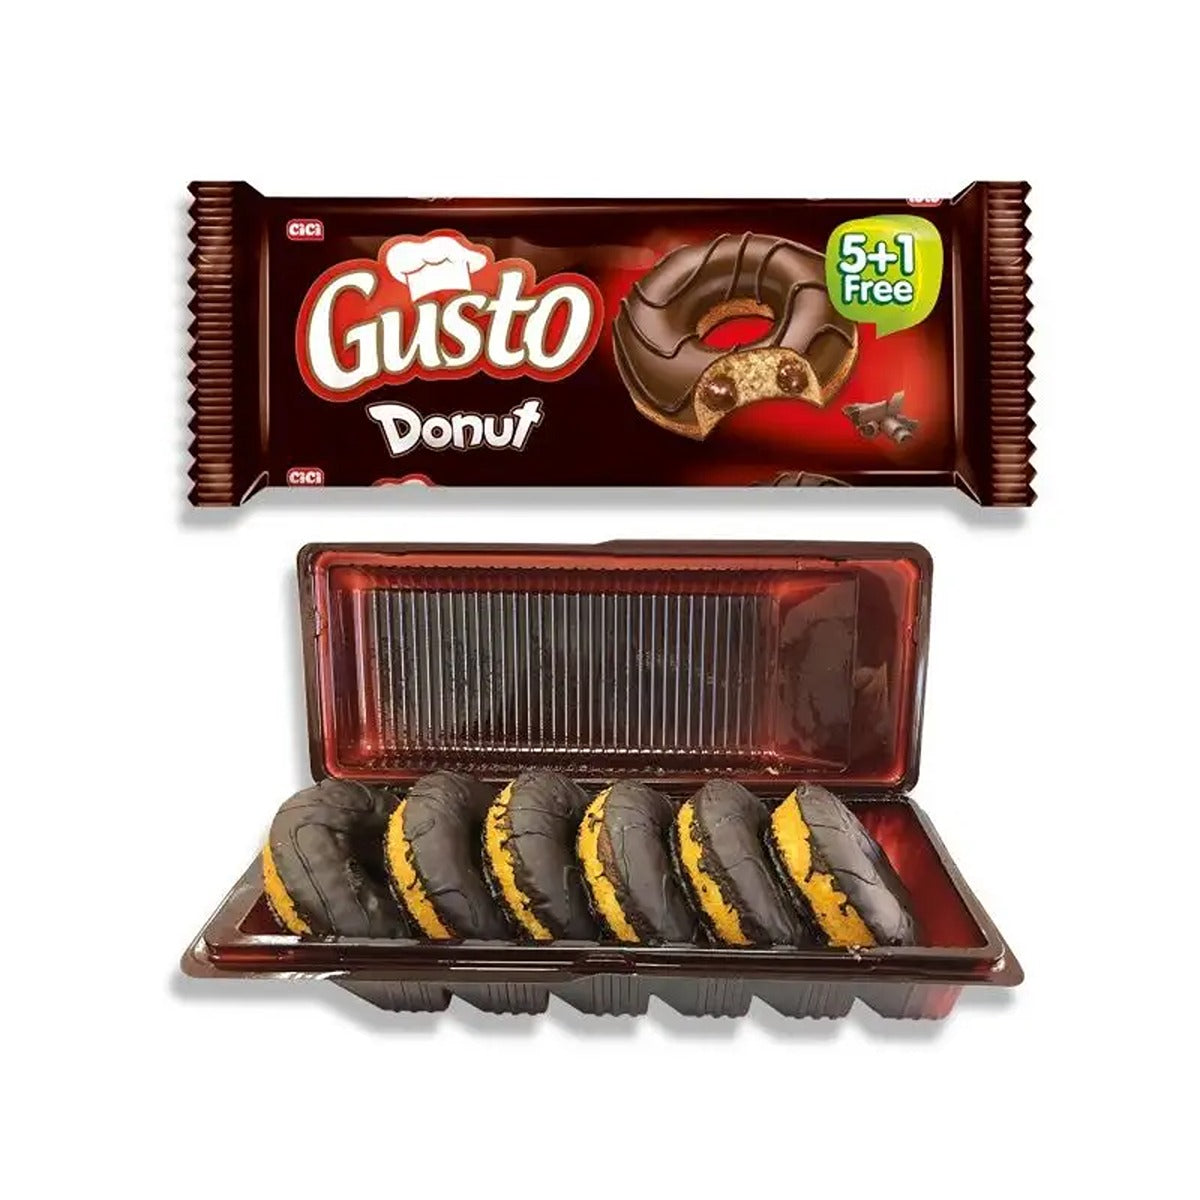 Cici - Gusto Donut - 300g - Continental Food Store